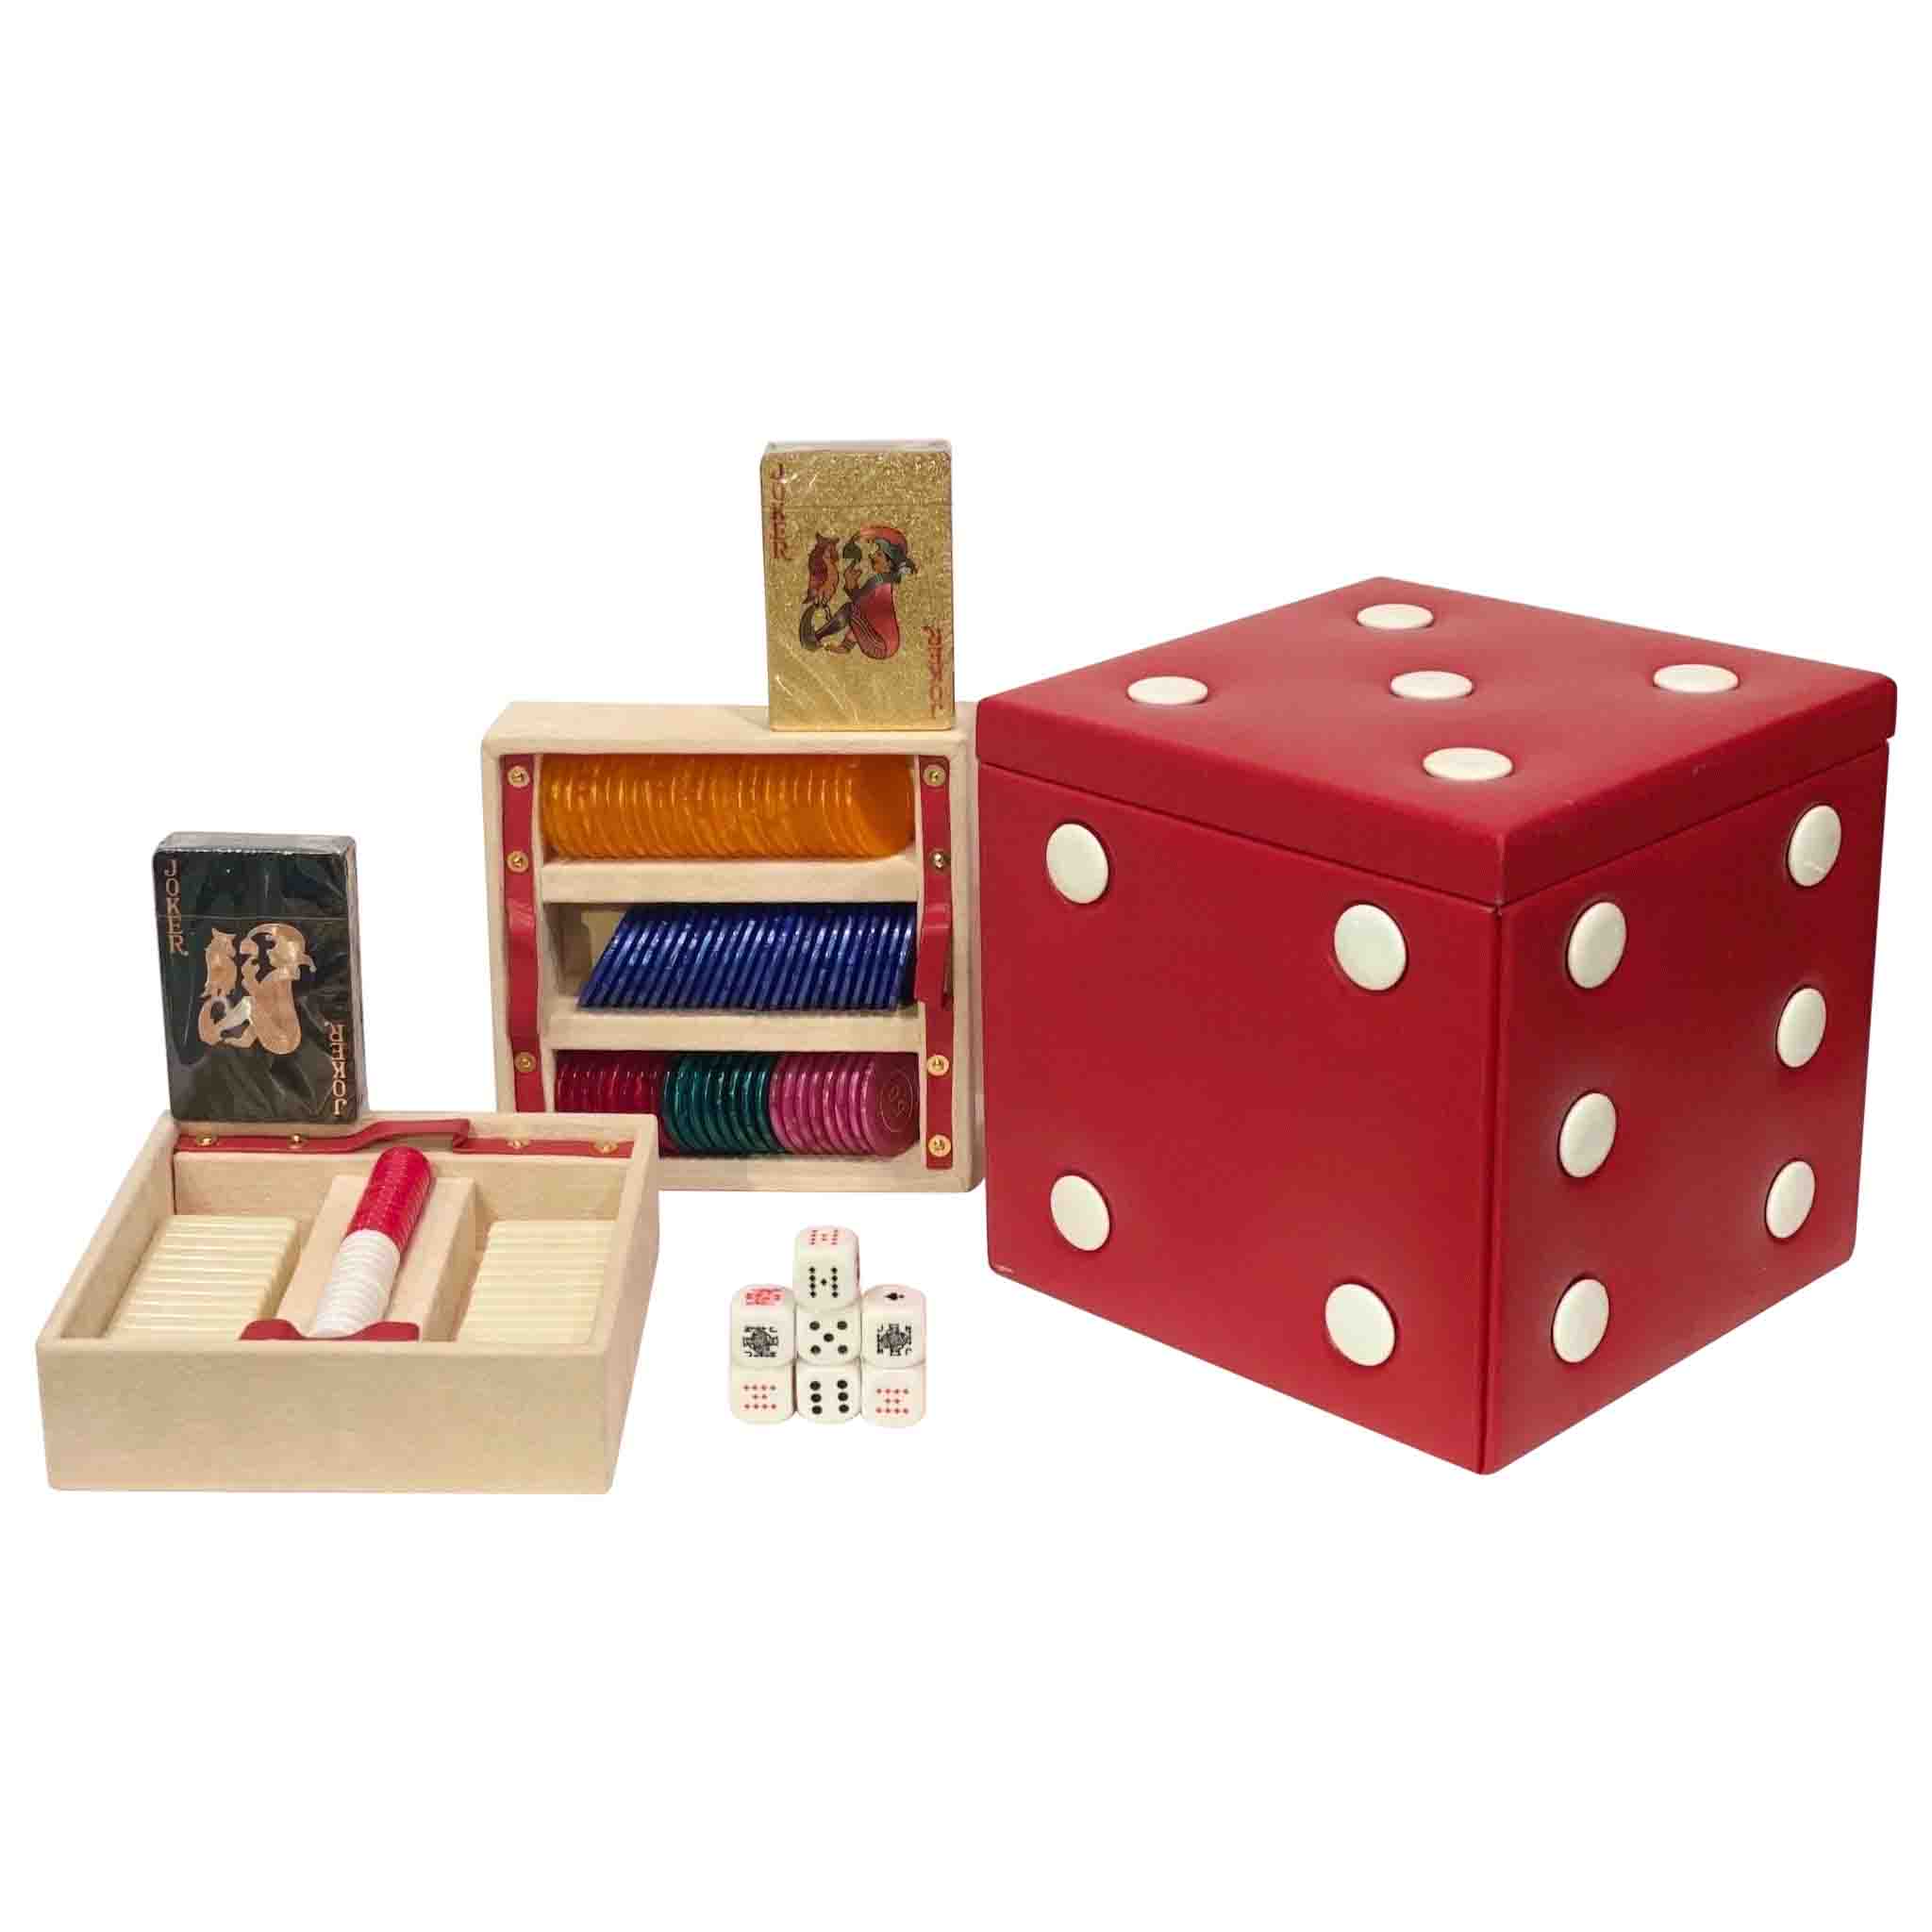 Vintage Italian Red Playing Game Box with Cards Dice Domino Checkers Poker Set 